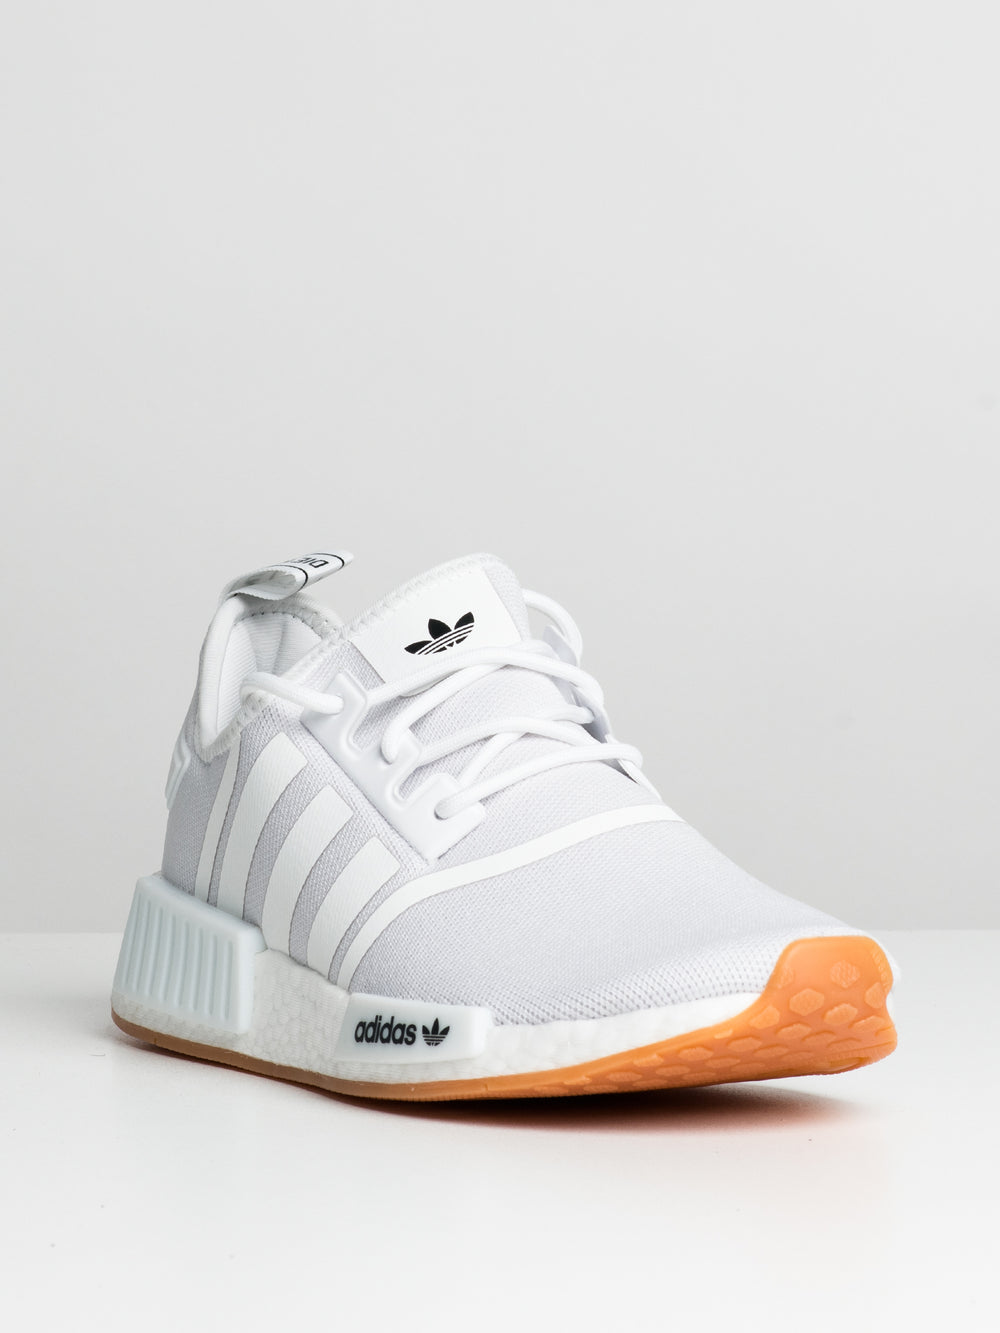 MENS ADIDAS NMD_R1 SNEAKERS - CLEARANCE